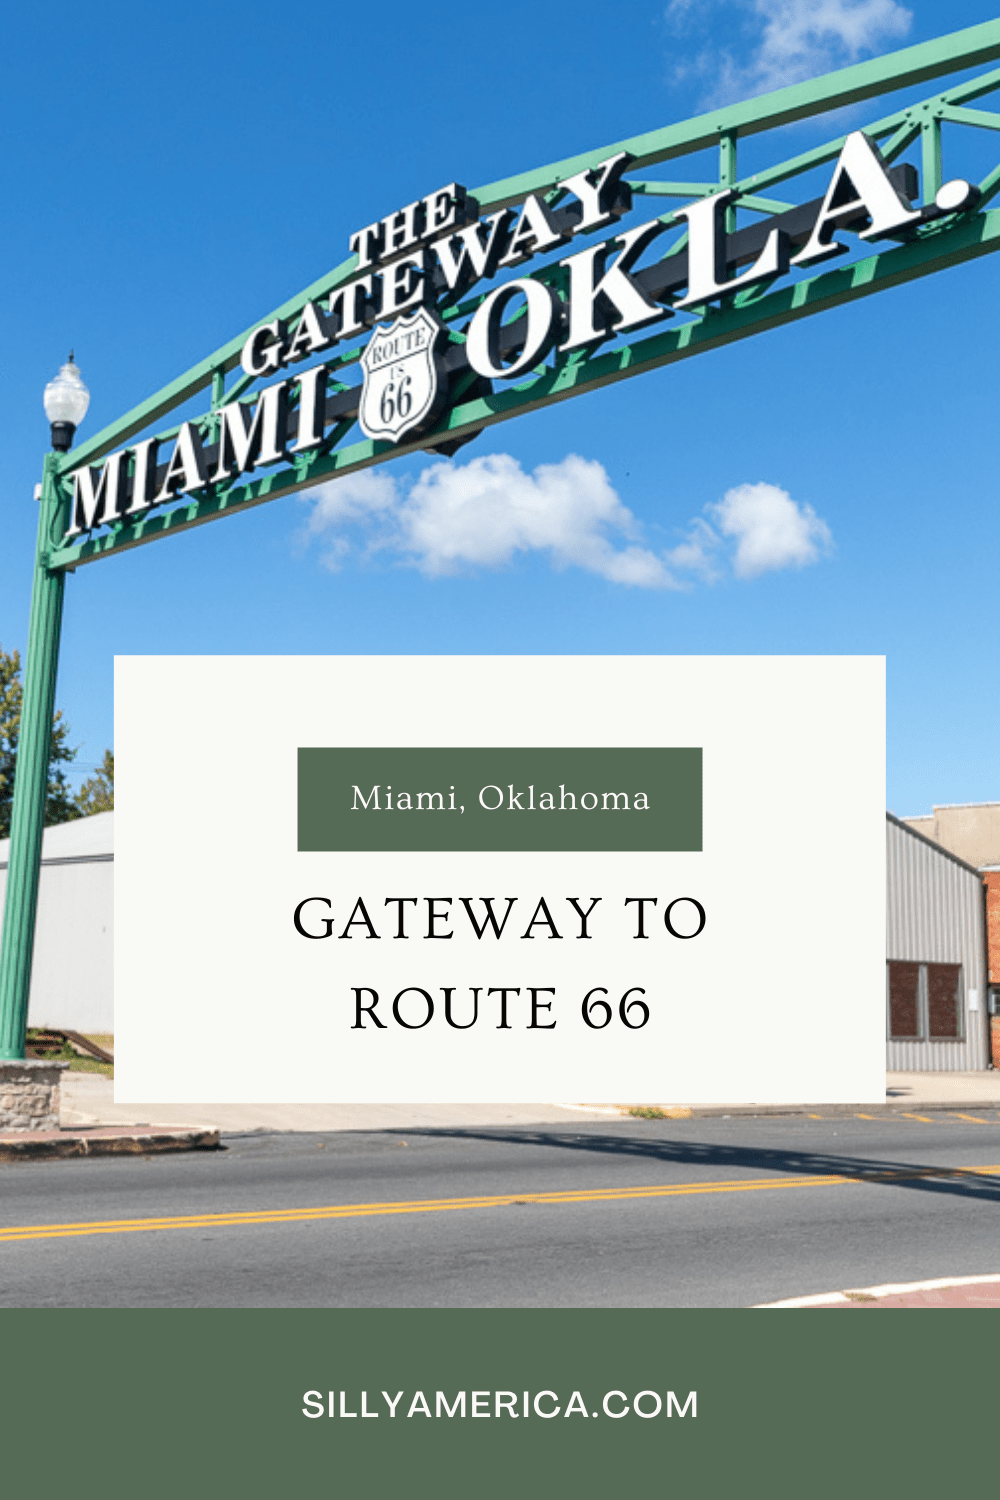 No road trip across Route 66 is complete without a stop in Miami. Miami, Oklahoma that is. Miami (pronounced "My-am-uh") is known as the Gateway to Route 66, and there is an arch to prove it.  #RoadTrips #RoadTripStop #Route66 #Route66RoadTrip #OklahomaRoute66 #Oklahoma #OklahomaRoadTrip #OklahomaRoadsideAttractions #RoadsideAttractions #RoadsideAttraction #RoadsideAmerica #RoadTrip